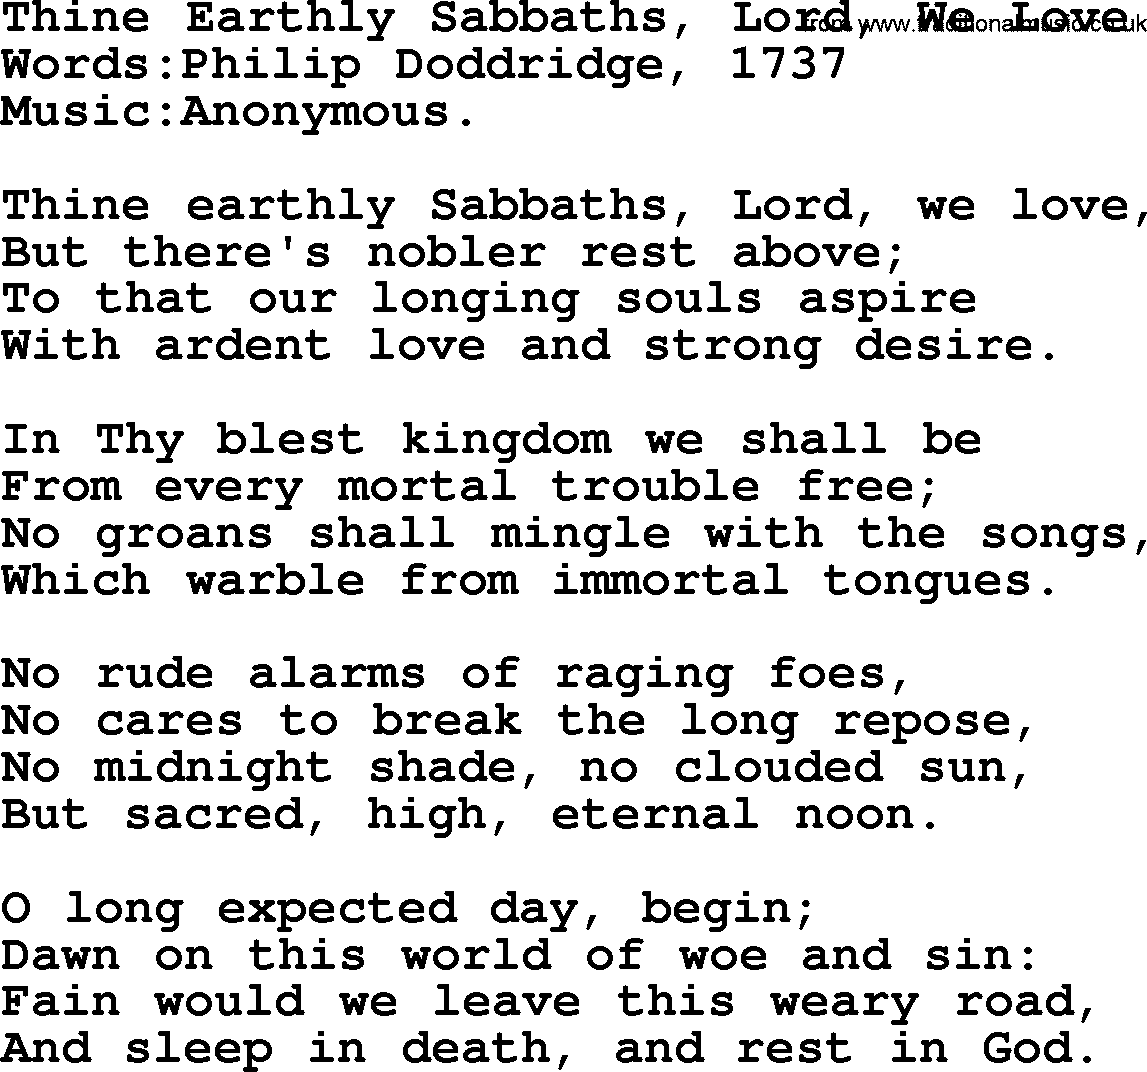 Songs and Hymns about Heaven: Thine Earthly Sabbaths, Lord, We Love lyrics with PDF